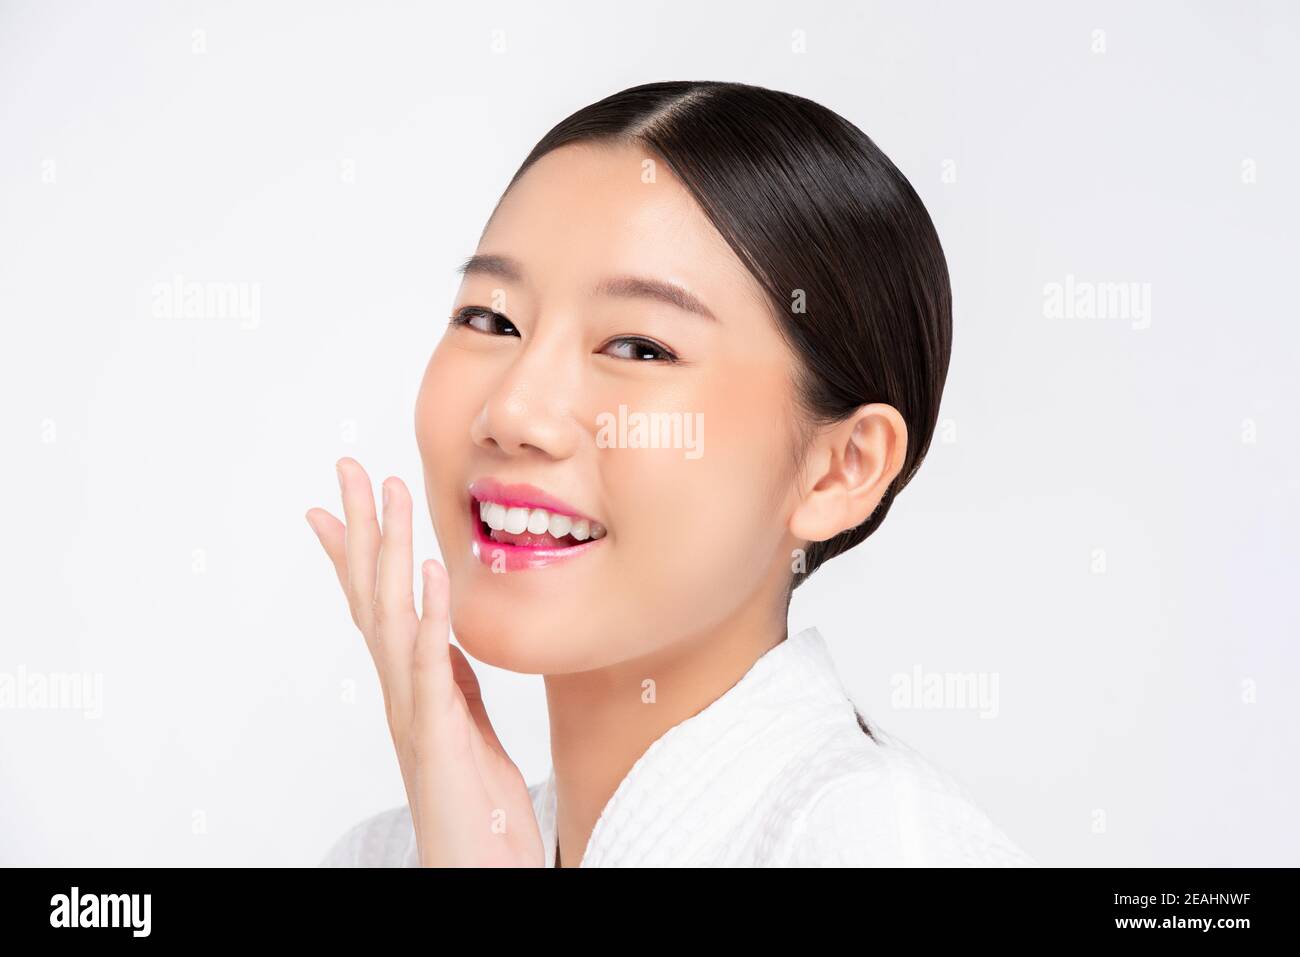 Young pretty Asian woman smiling with hand touching face on white background for beauty and skin care concepts Stock Photo